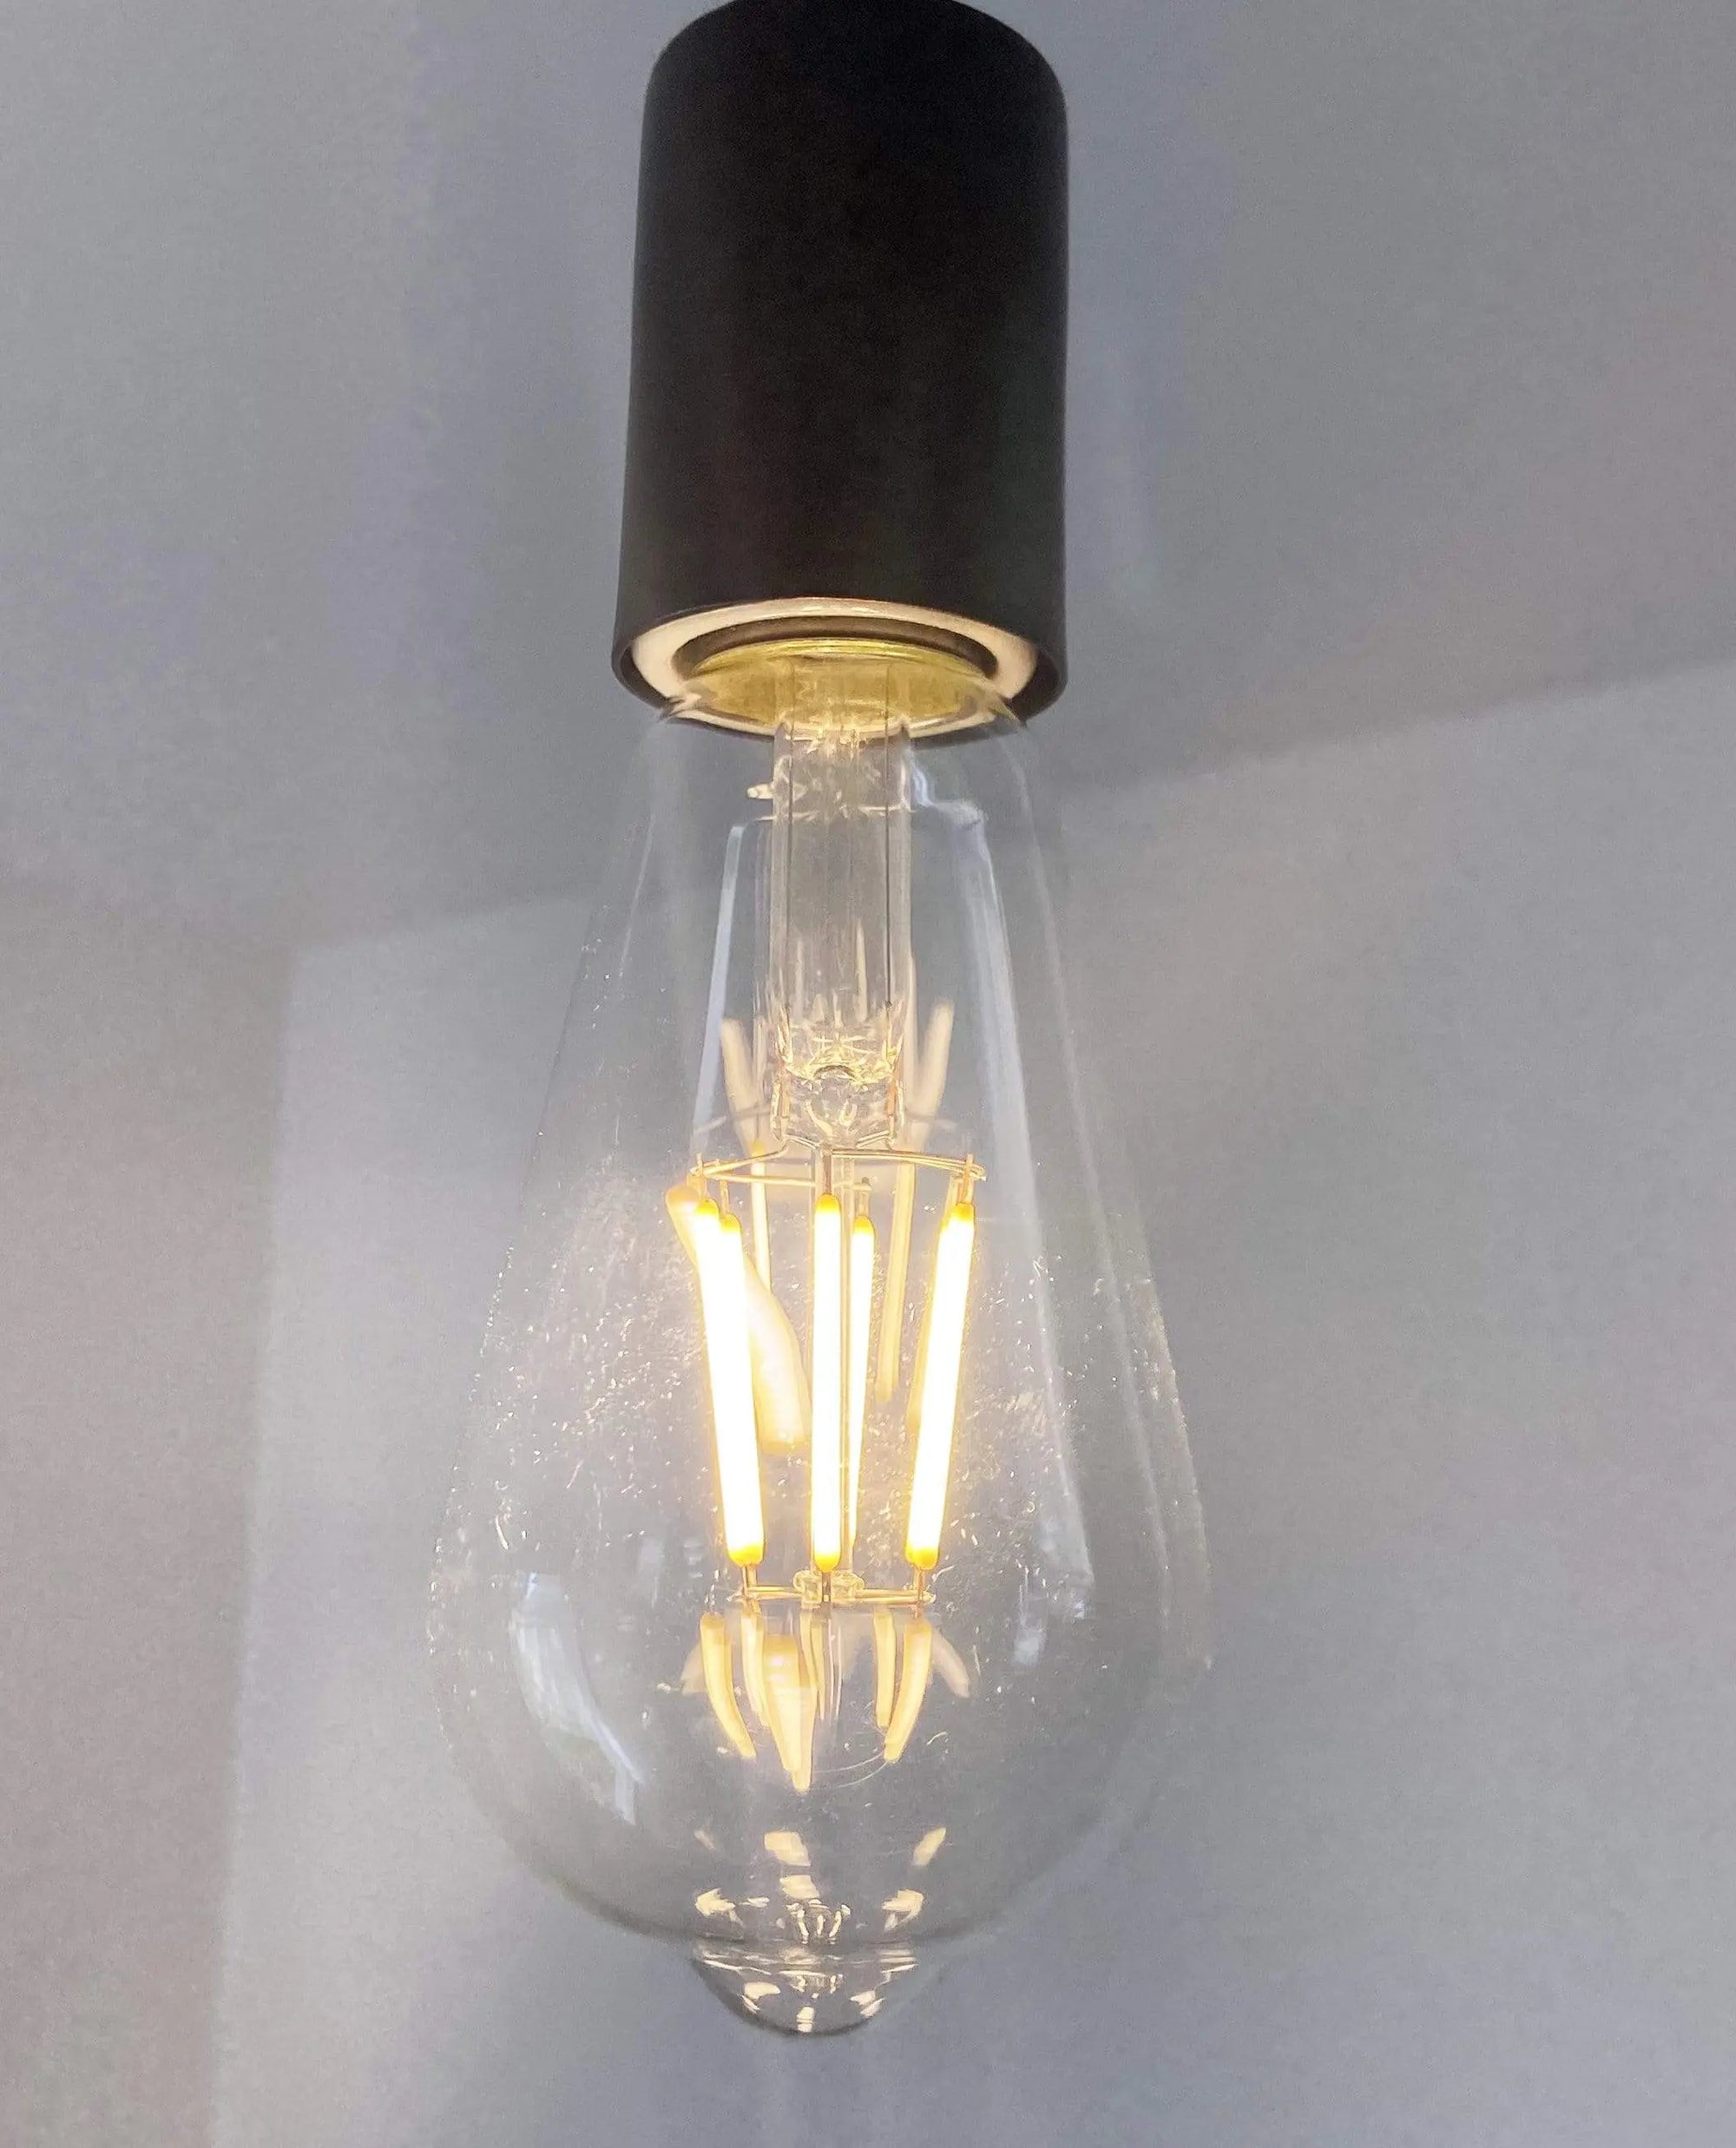 LED Edison Inspired Light Bulb Dimmable - 60 watts Equivalent The Lamp Goods